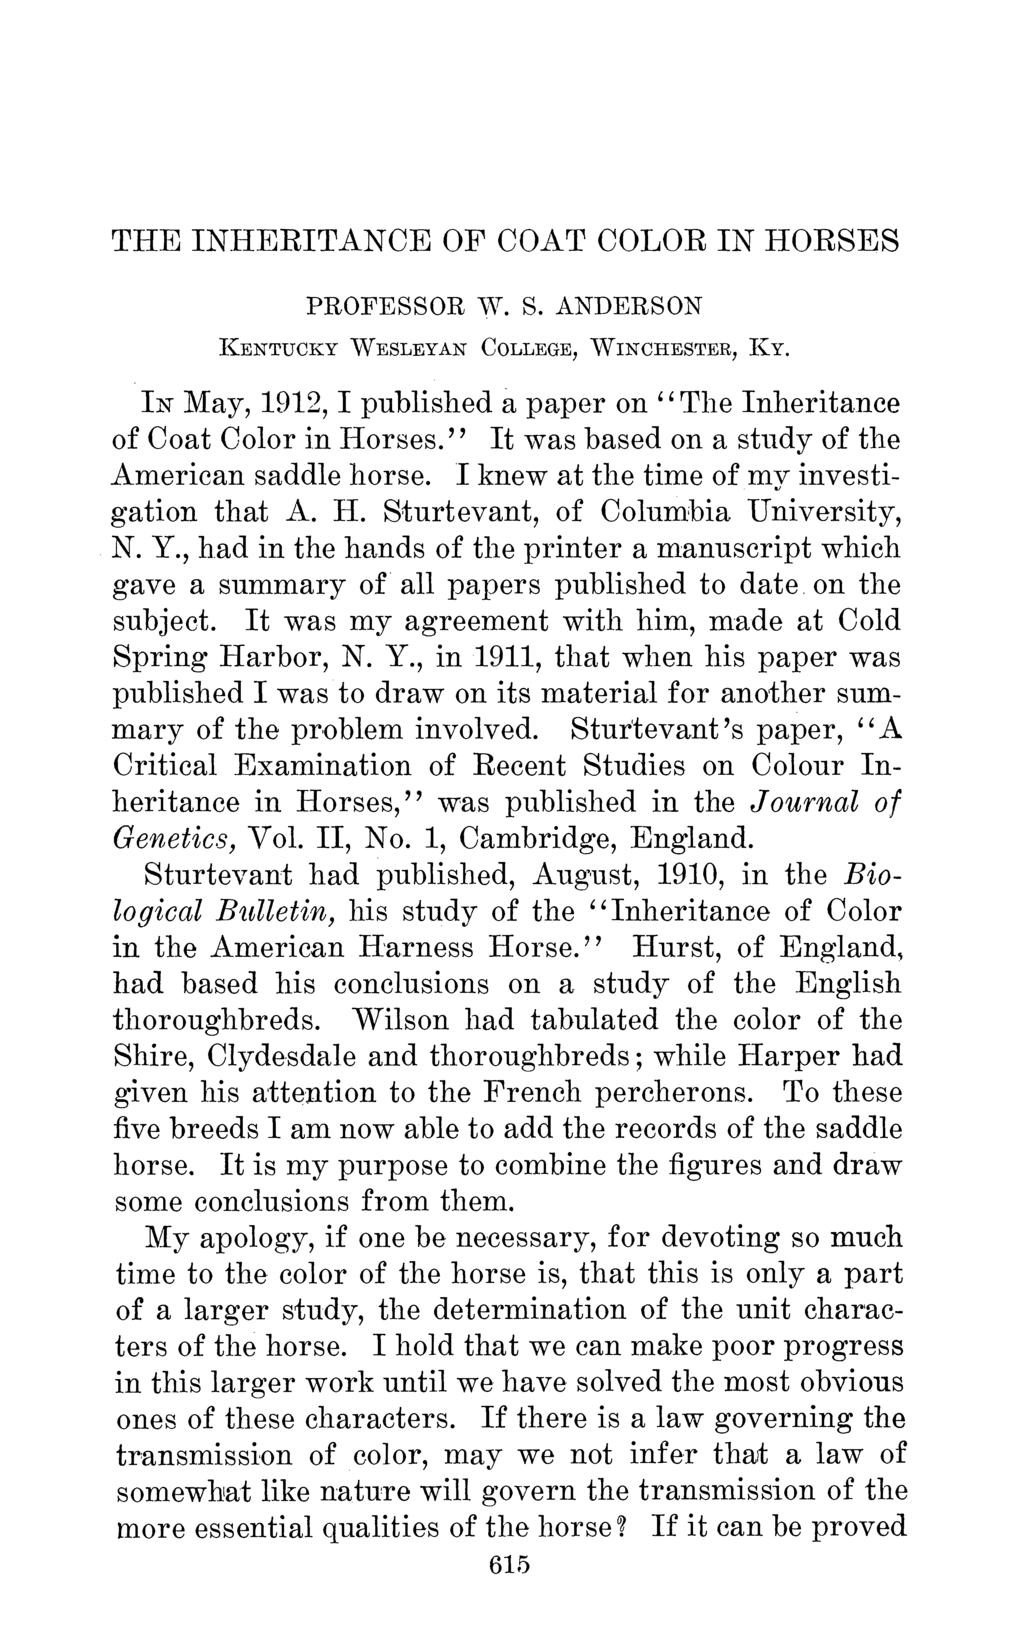 THE INHERITANCE OF COAT COLOR IN HORSES PROFESSOR T. S. ANDERSON KENTUCKY WESLEYAN COLLEGE, WINCHESTER, IY. IN May, 1912, I published a paper on " The Inheritance of Coat Color in Horses.